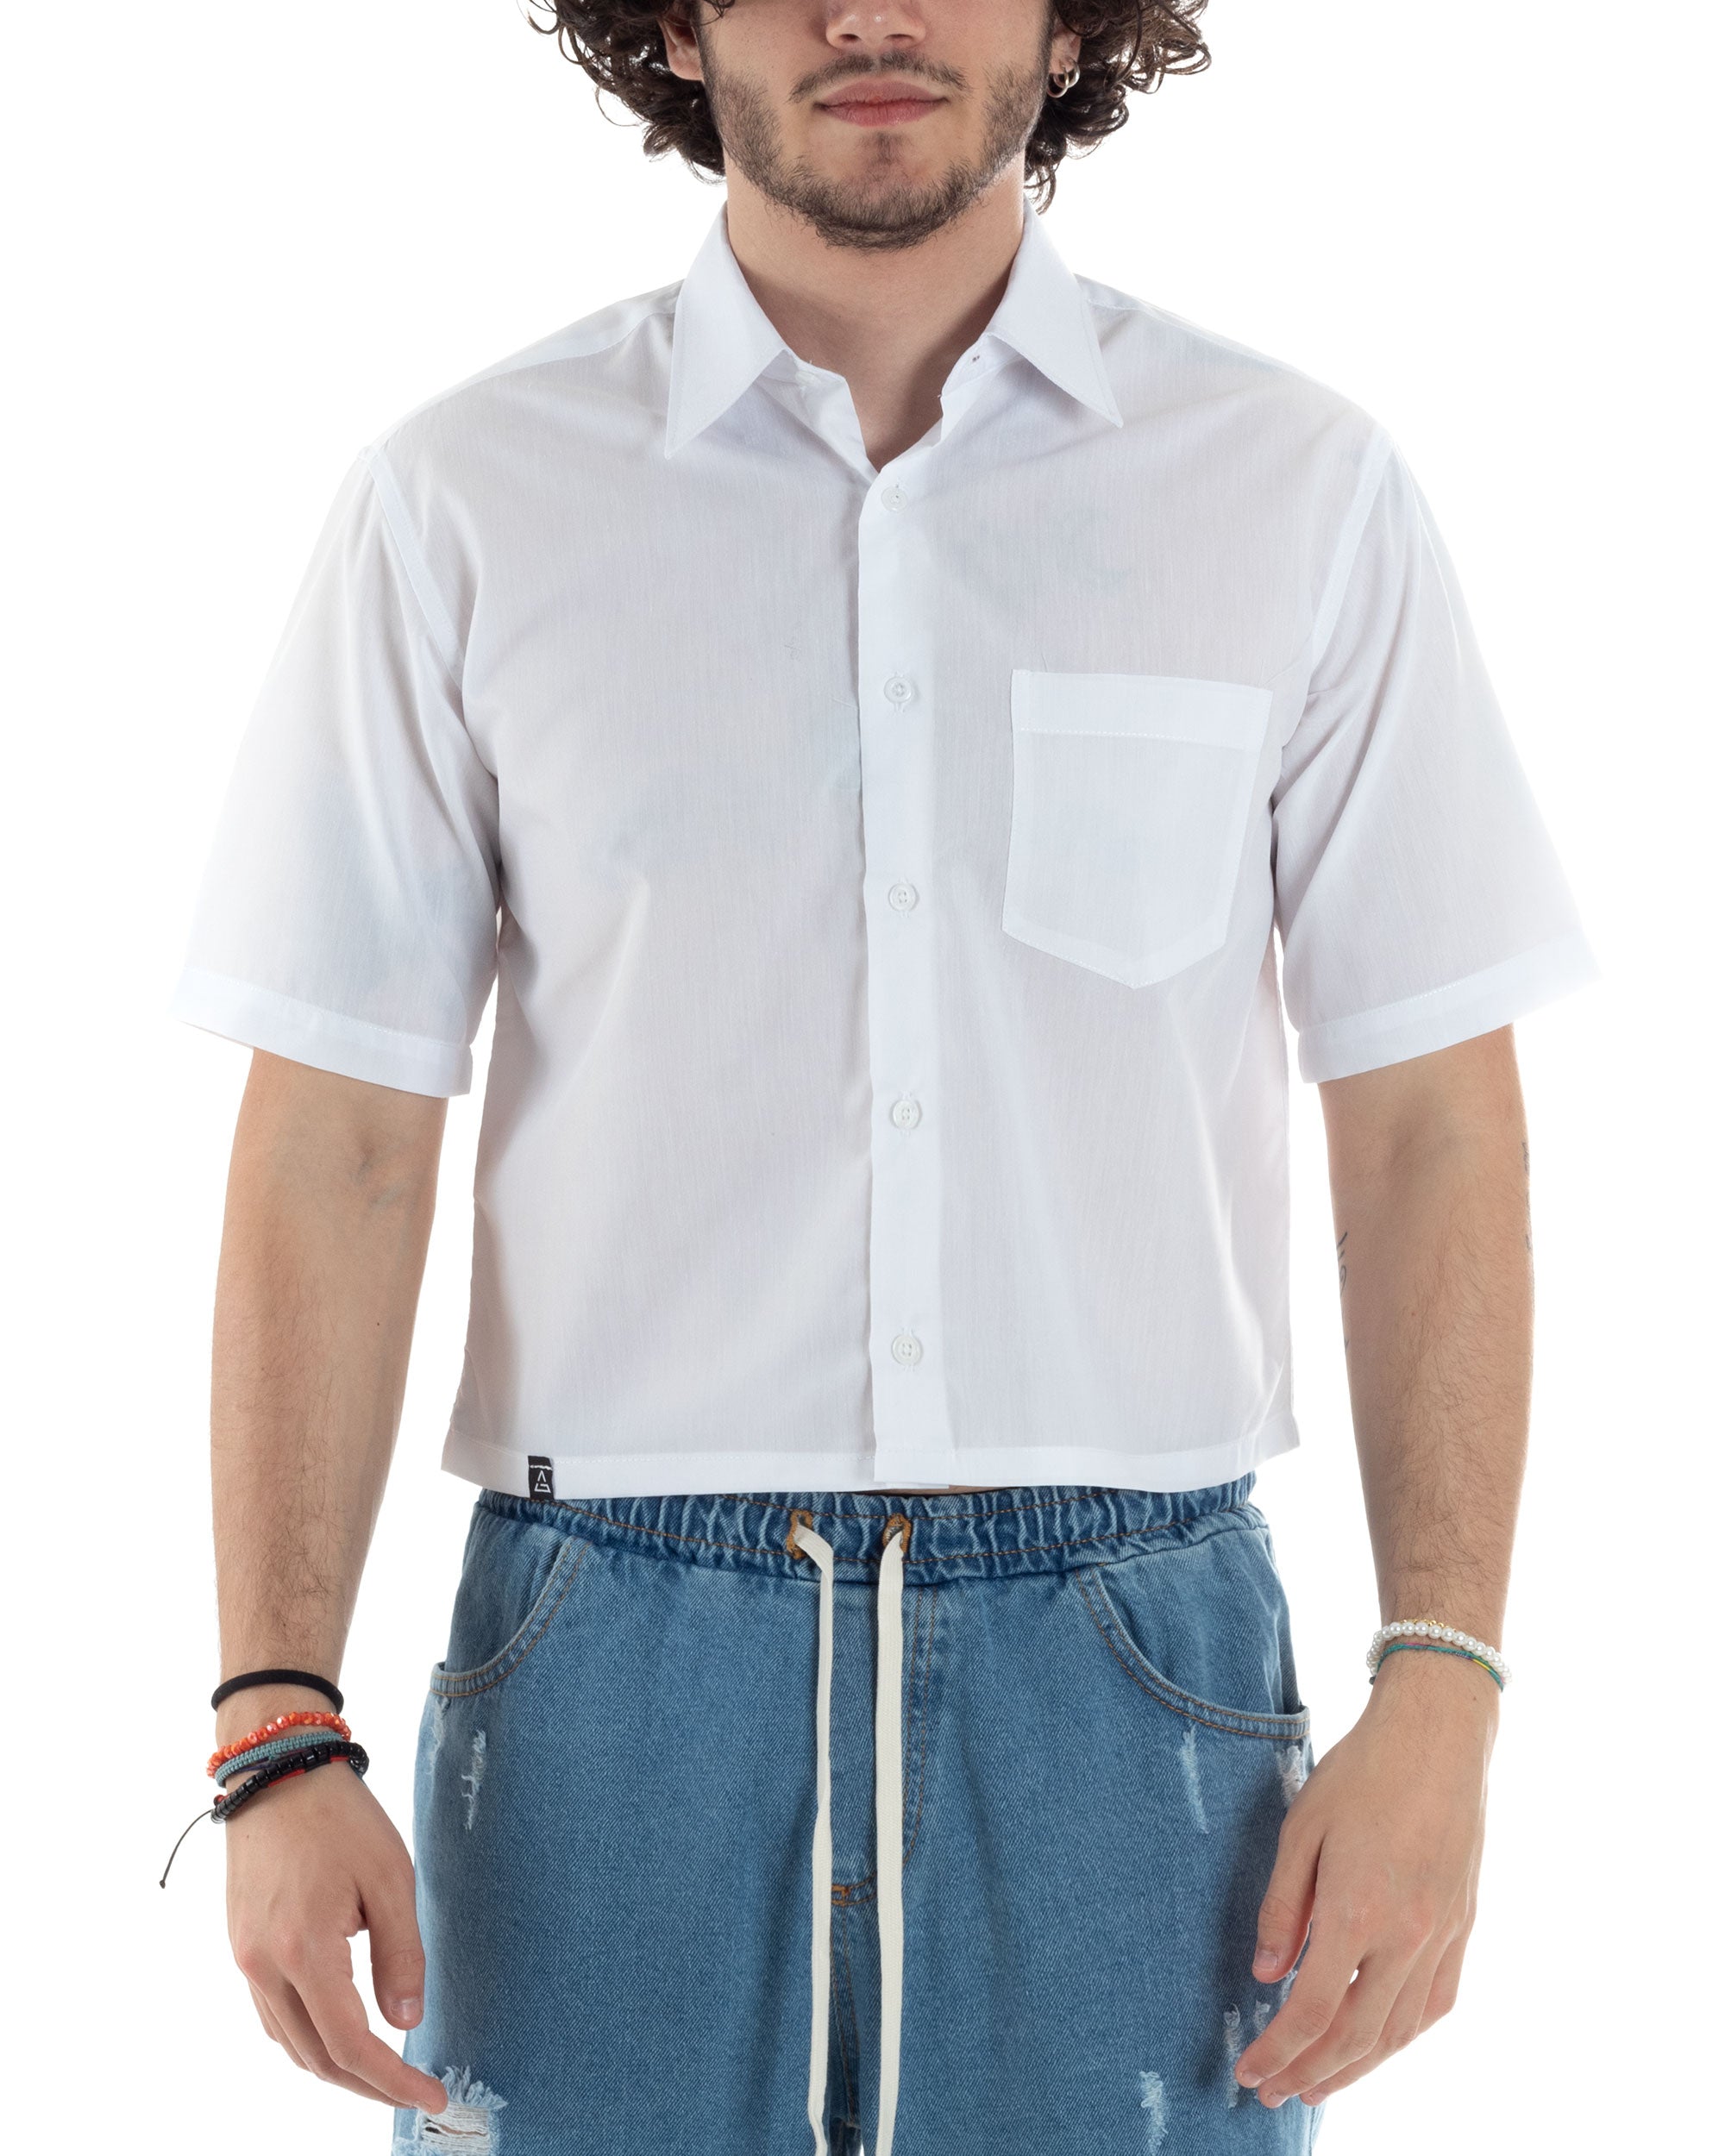 Men's Short Sleeve Cropped Shirt Solid Color White Boxy Fit Casual GIOSAL-CC1195A